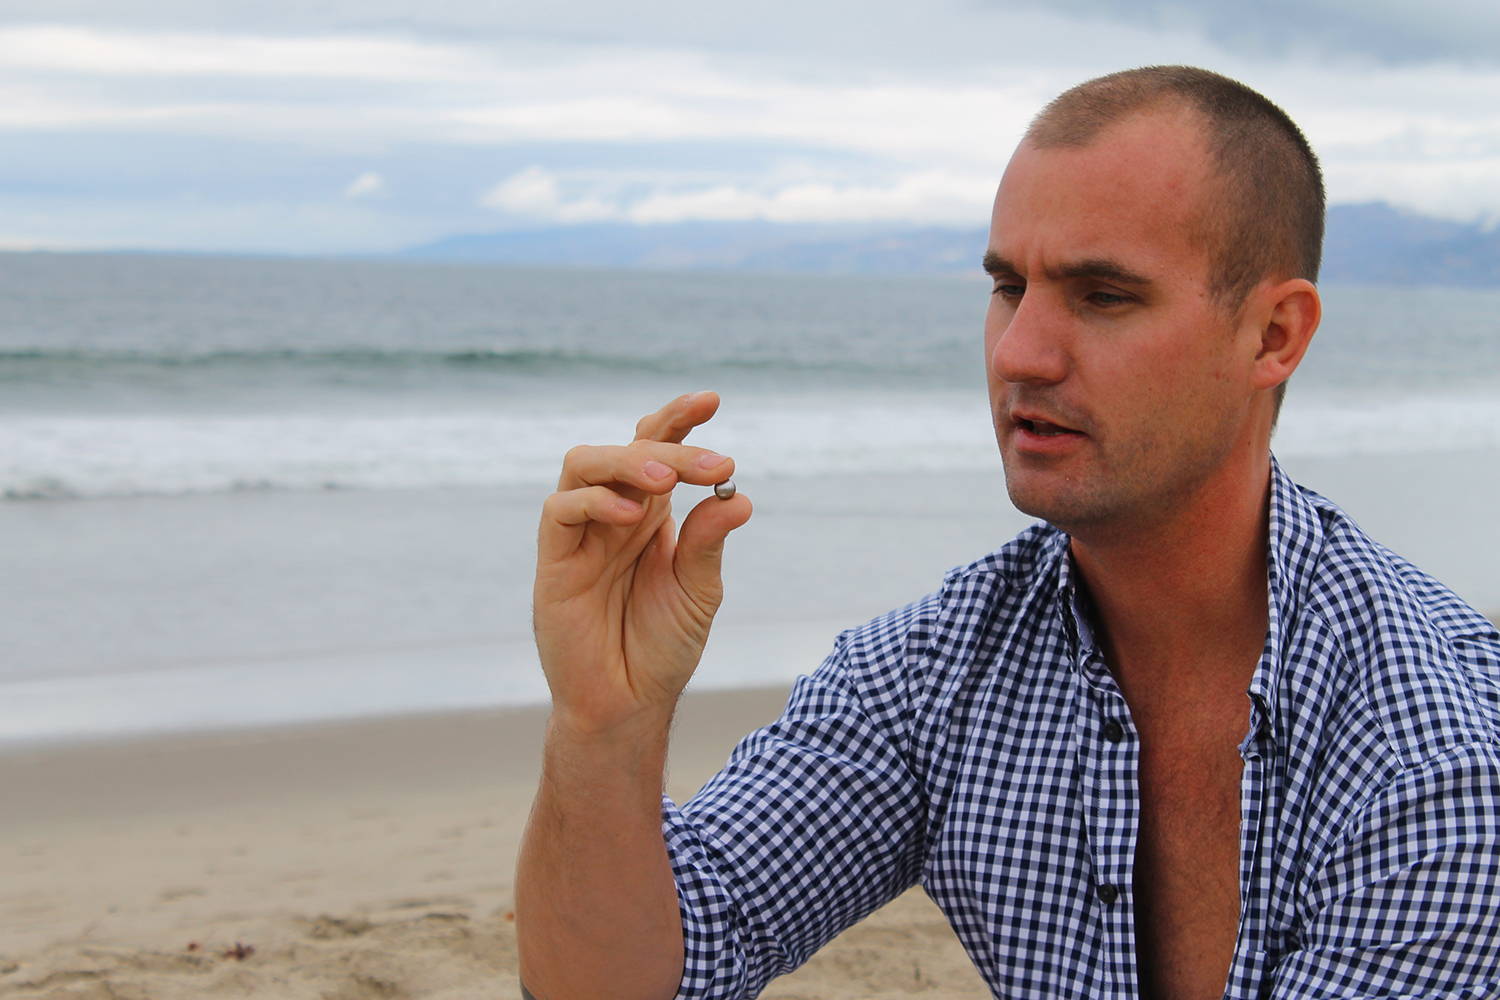 Owner of Pearls of Joy Kevin Canning examines a pearl with ocean in the background